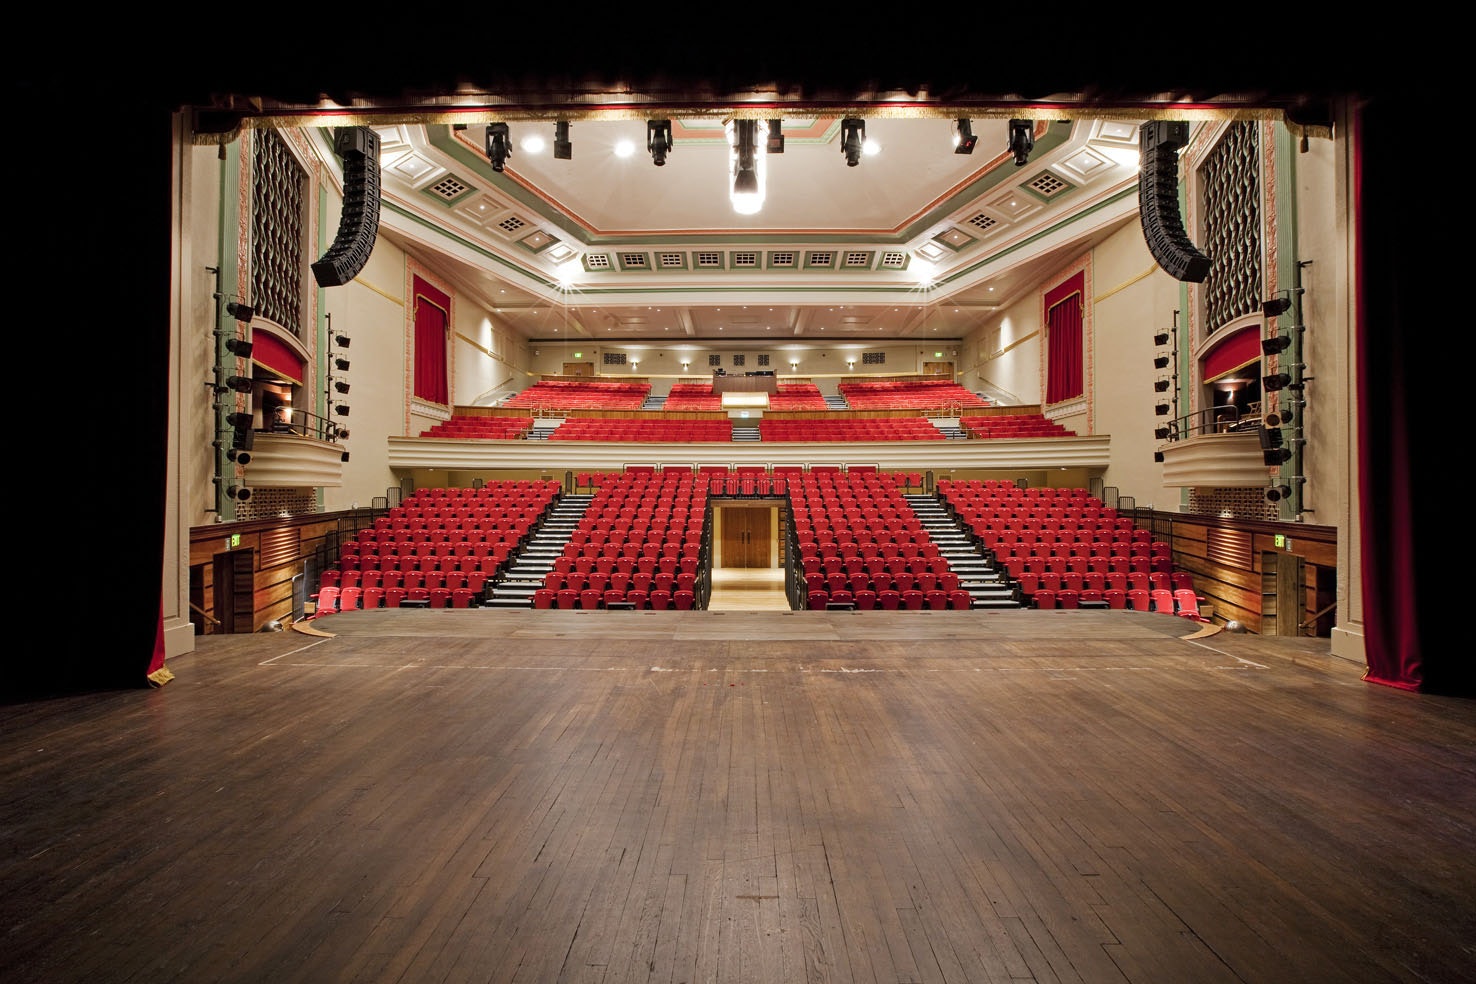 The People's Palace - Queen Mary Venues - The Great Hall Theatre image 4